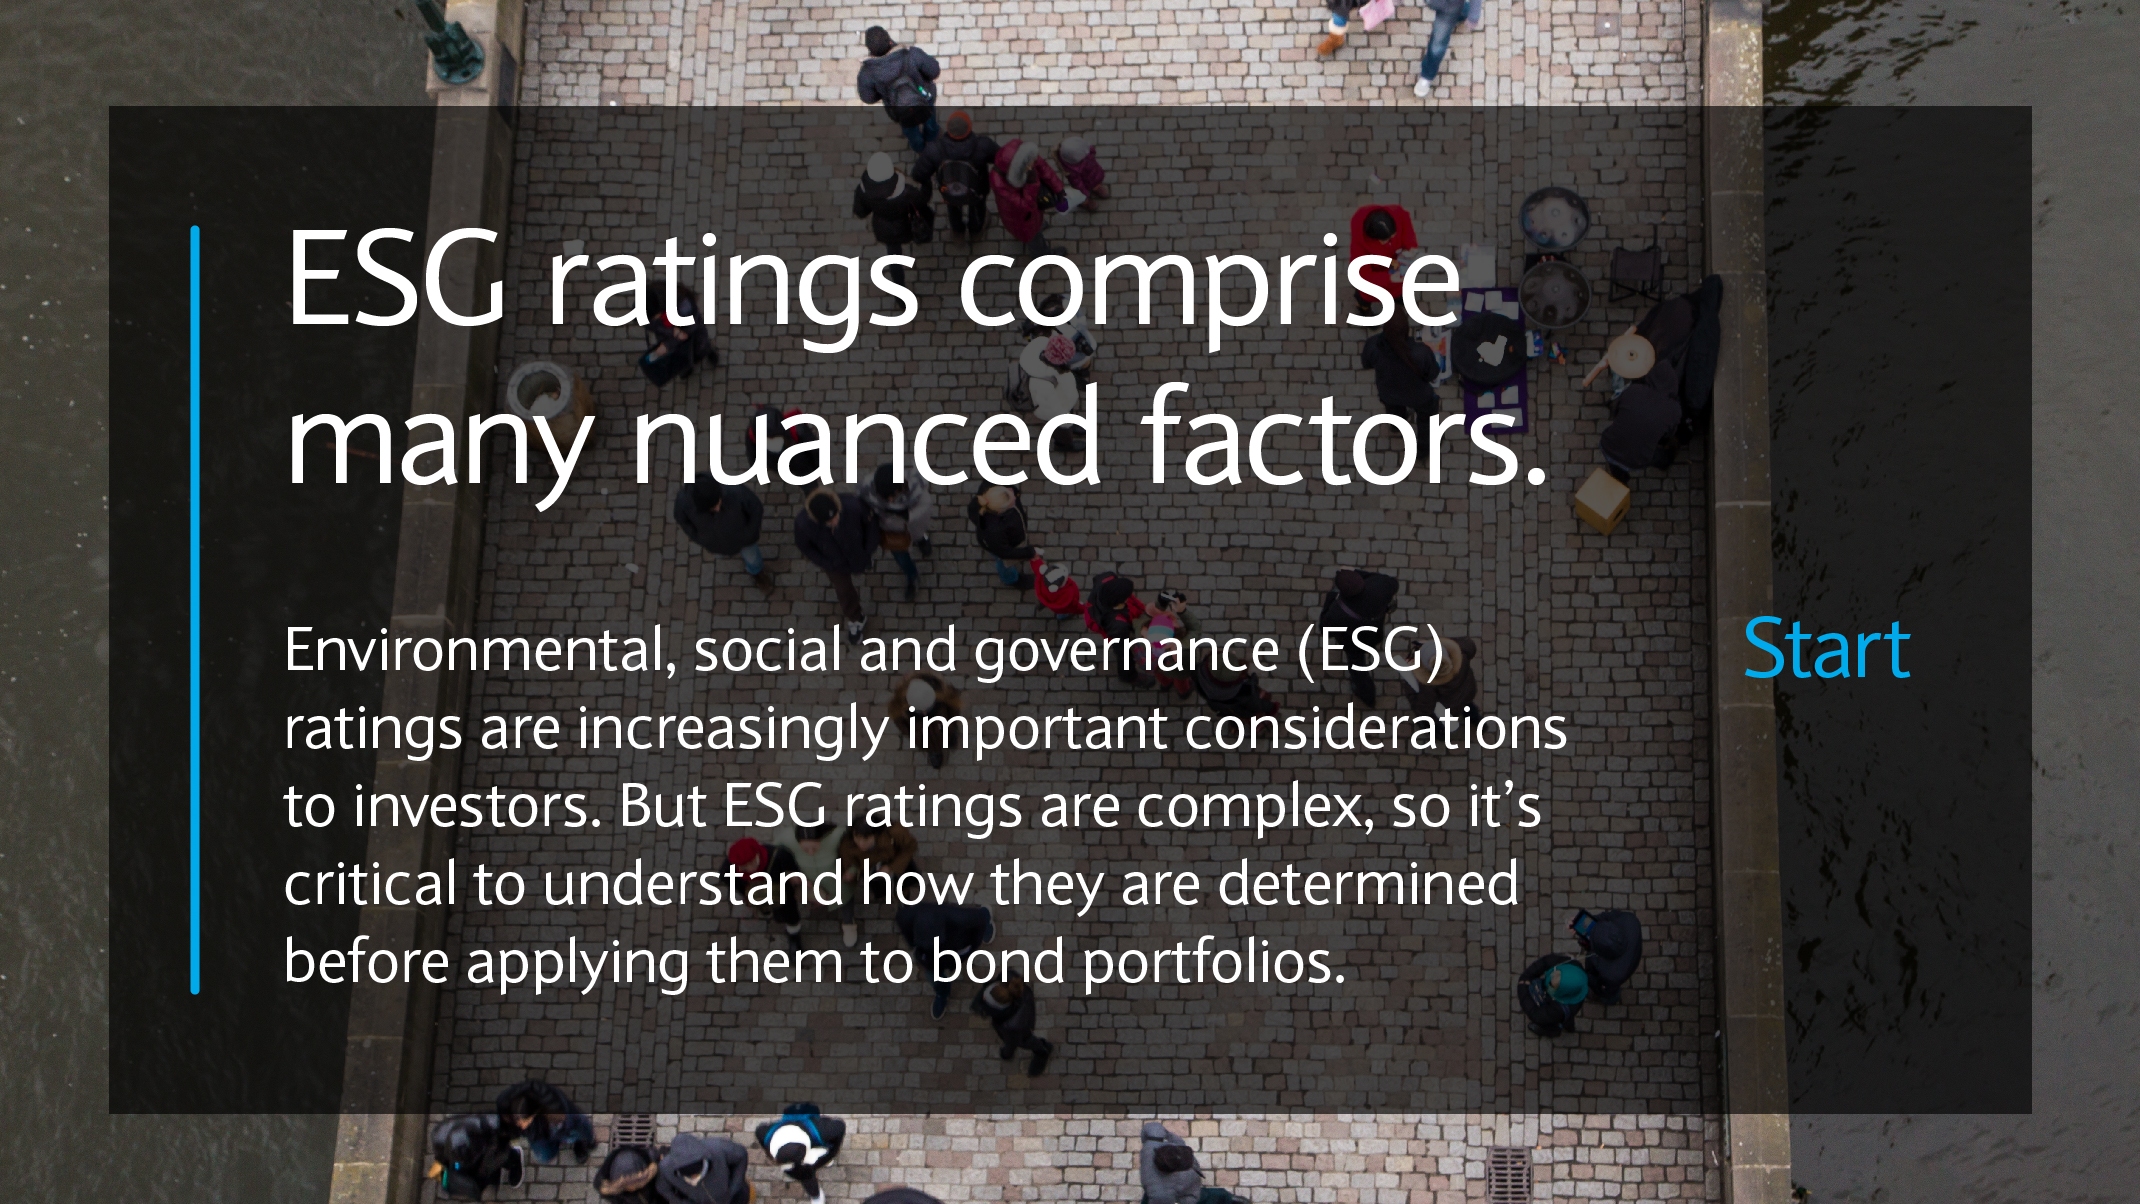 ESG ratings comprise many nuanced factors. It's critical to understand how they are determined before applying them.